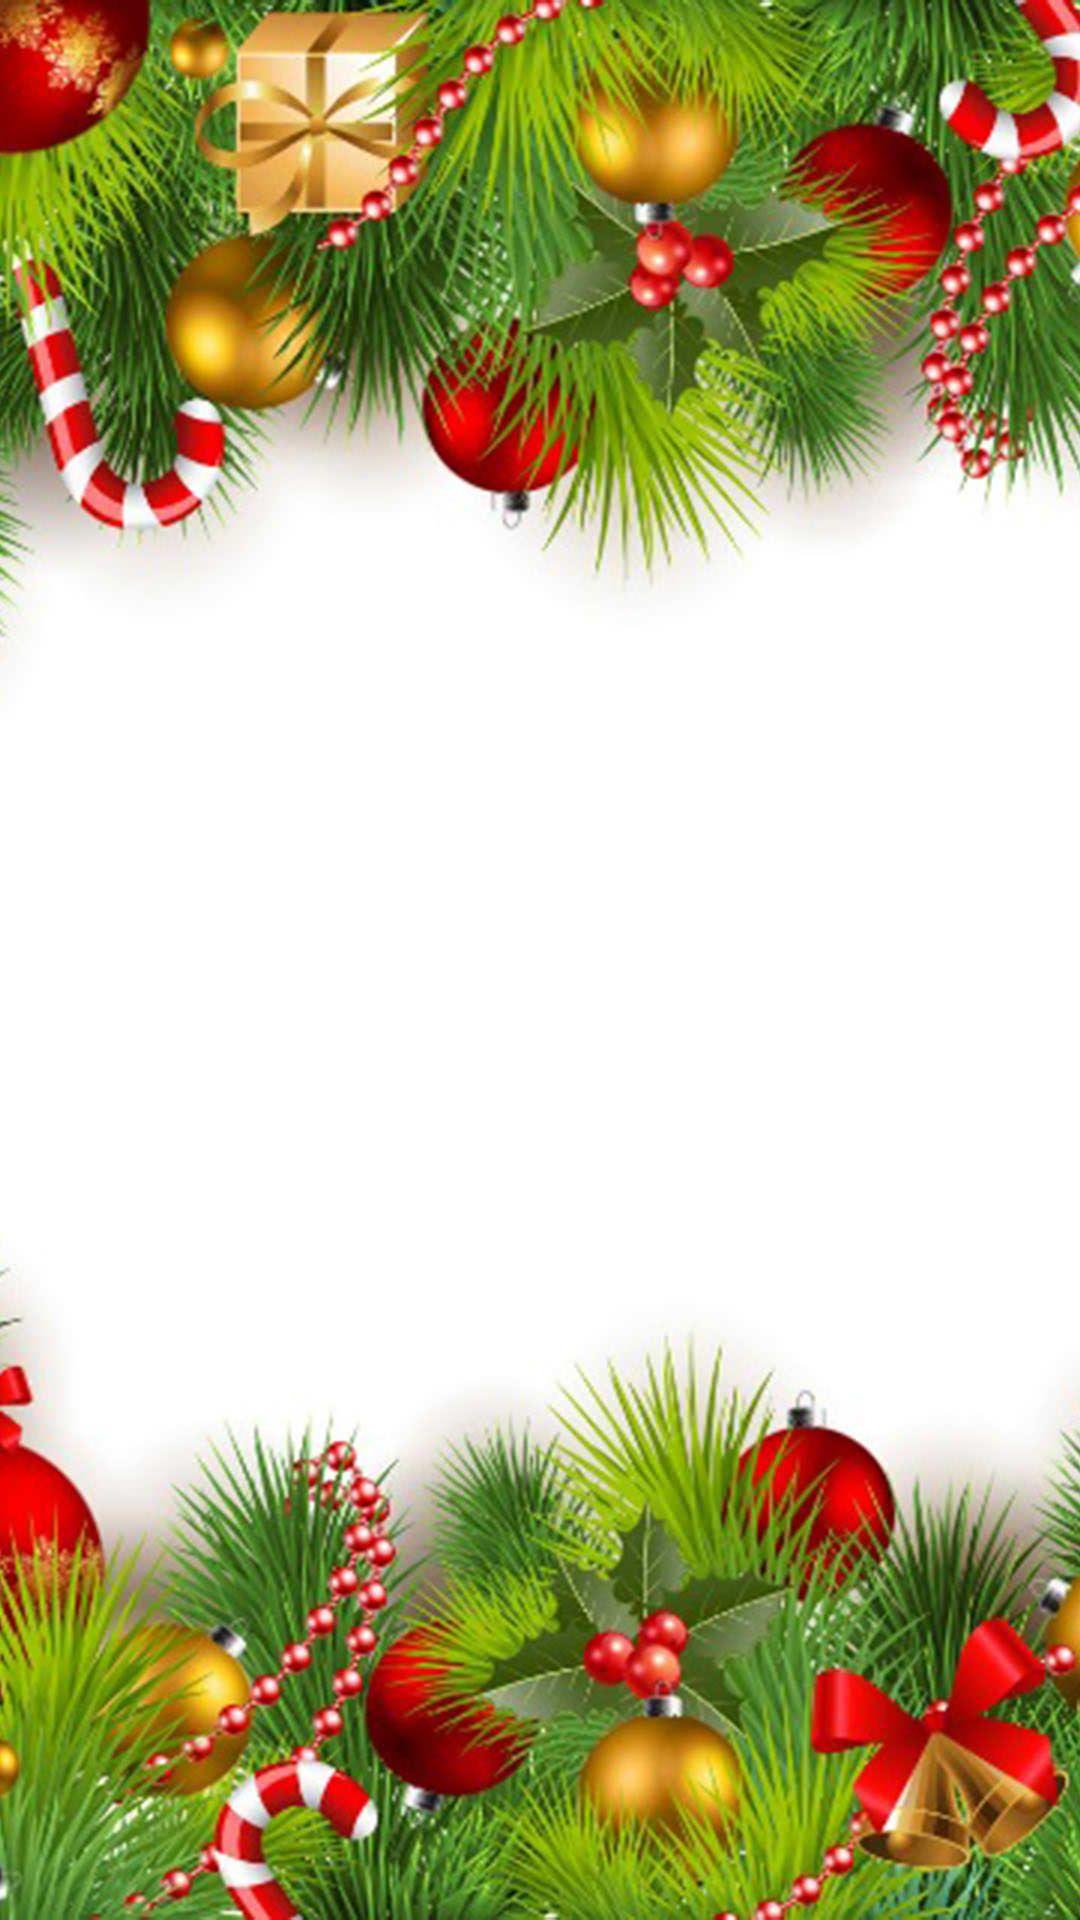 Christmas Bell Wallpapers - Top Free Christmas Bell Backgrounds ...